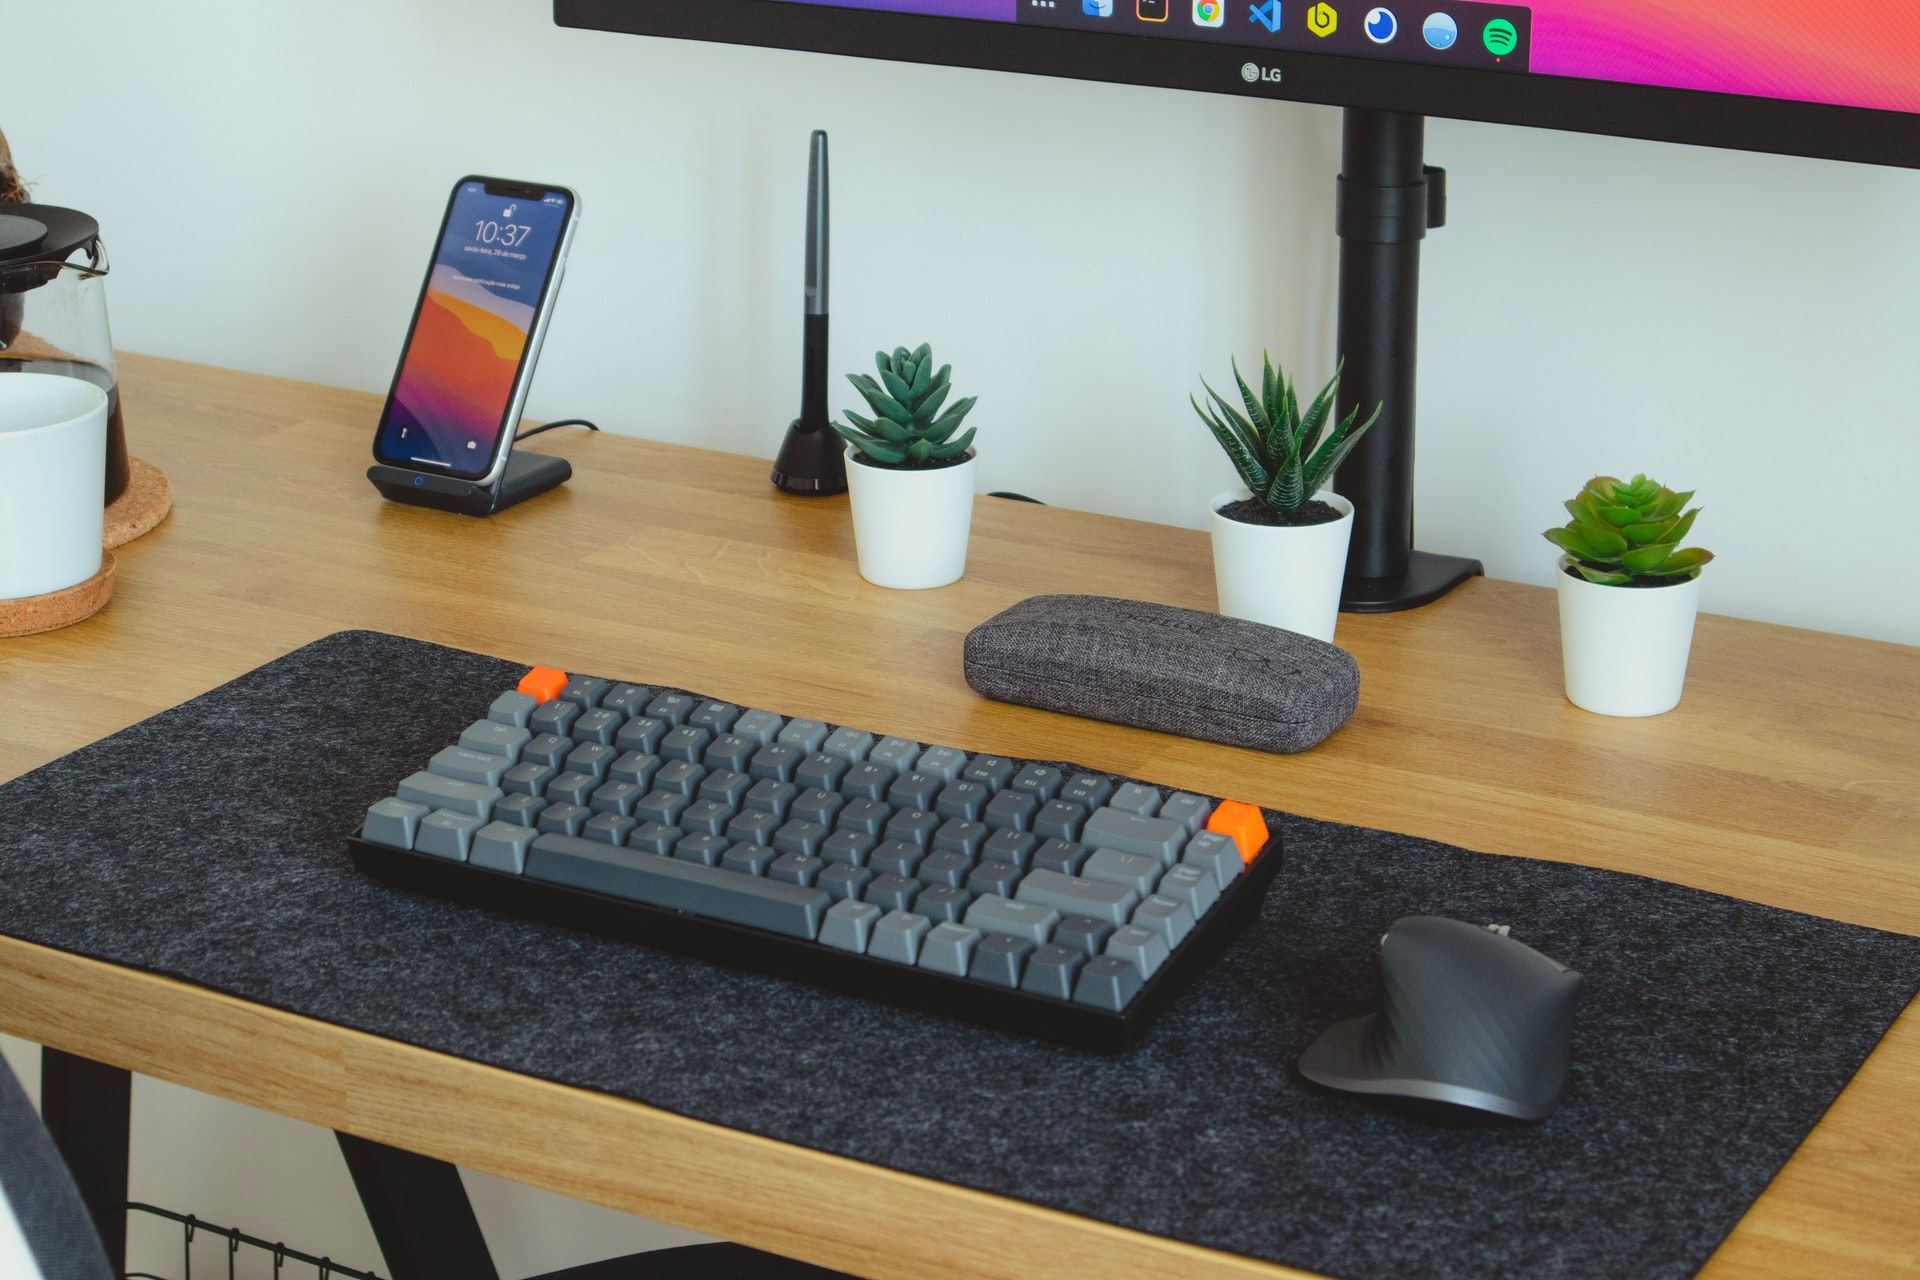 minimal custom keyboard design with desk mat, plants, mouse, and monitor, iphone